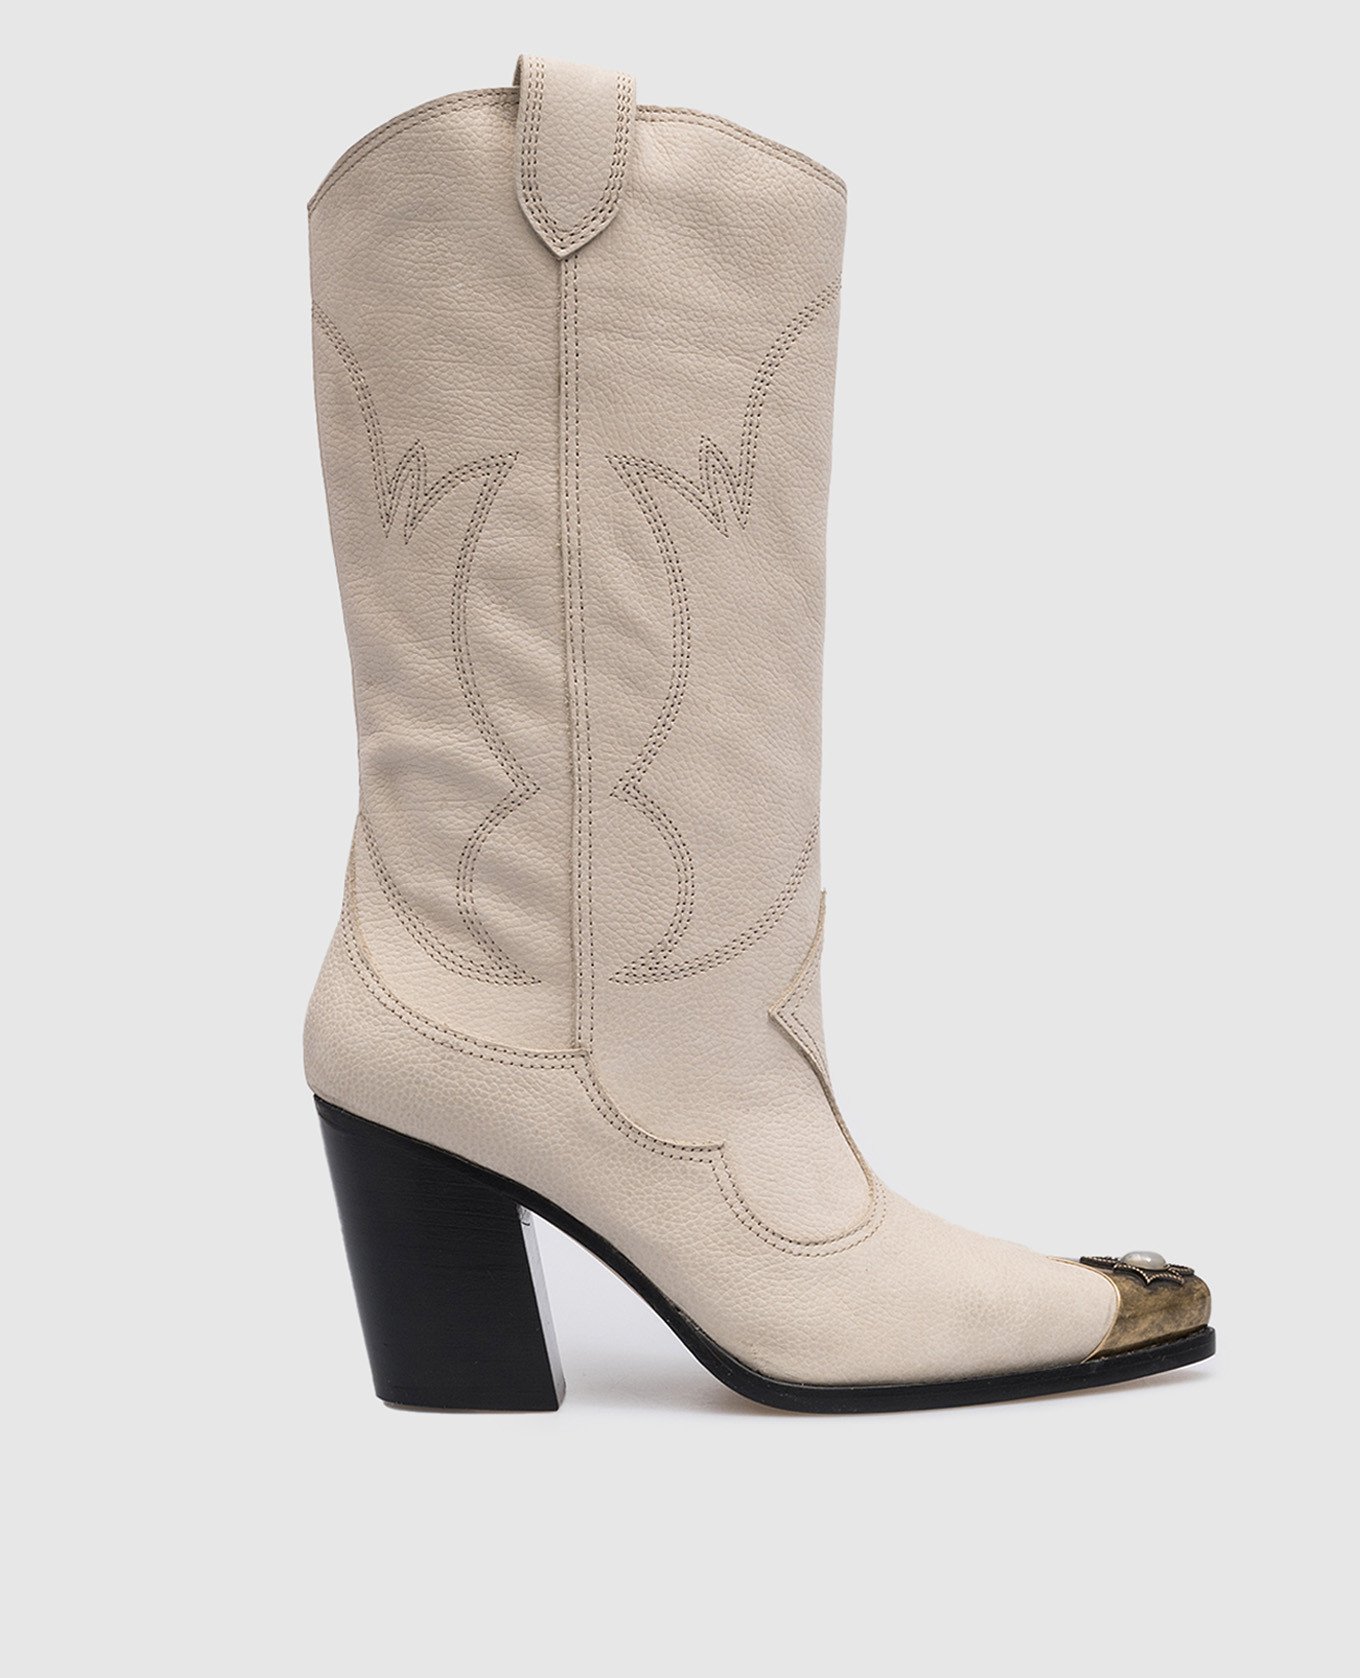 Beige leather boots with metallic trim